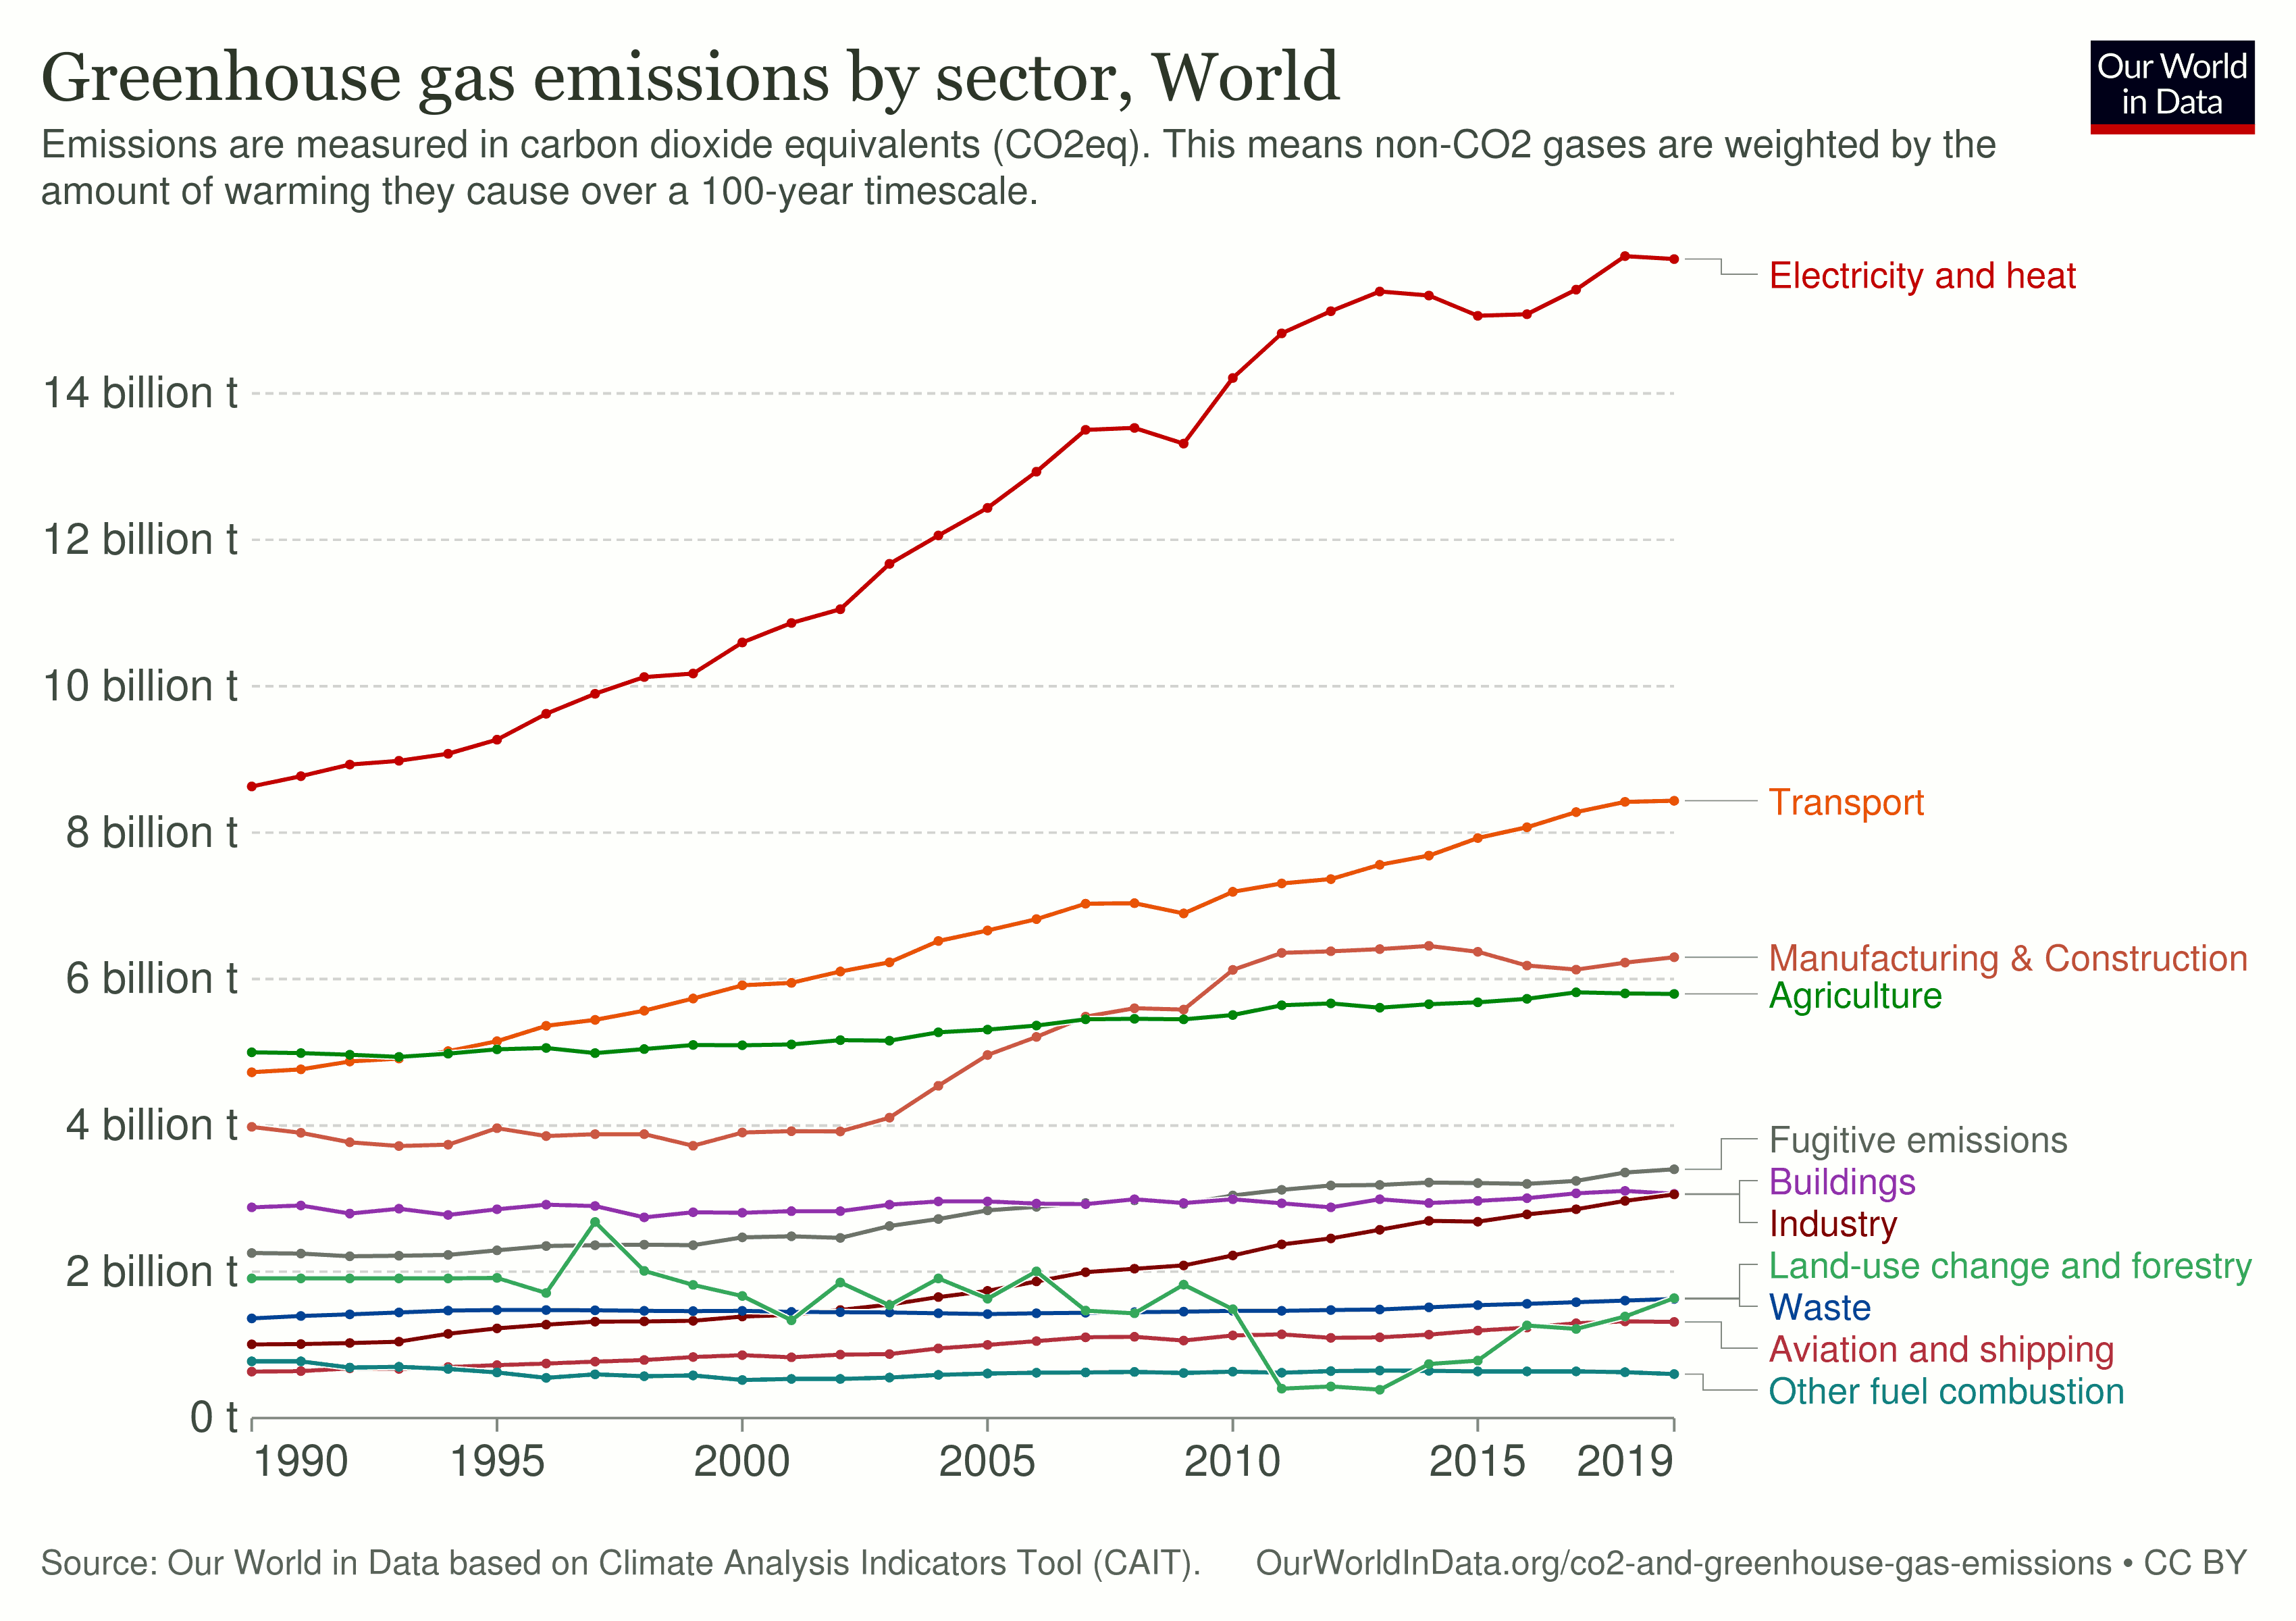 Worldwide Greenhouse Gas Emissions, by sector